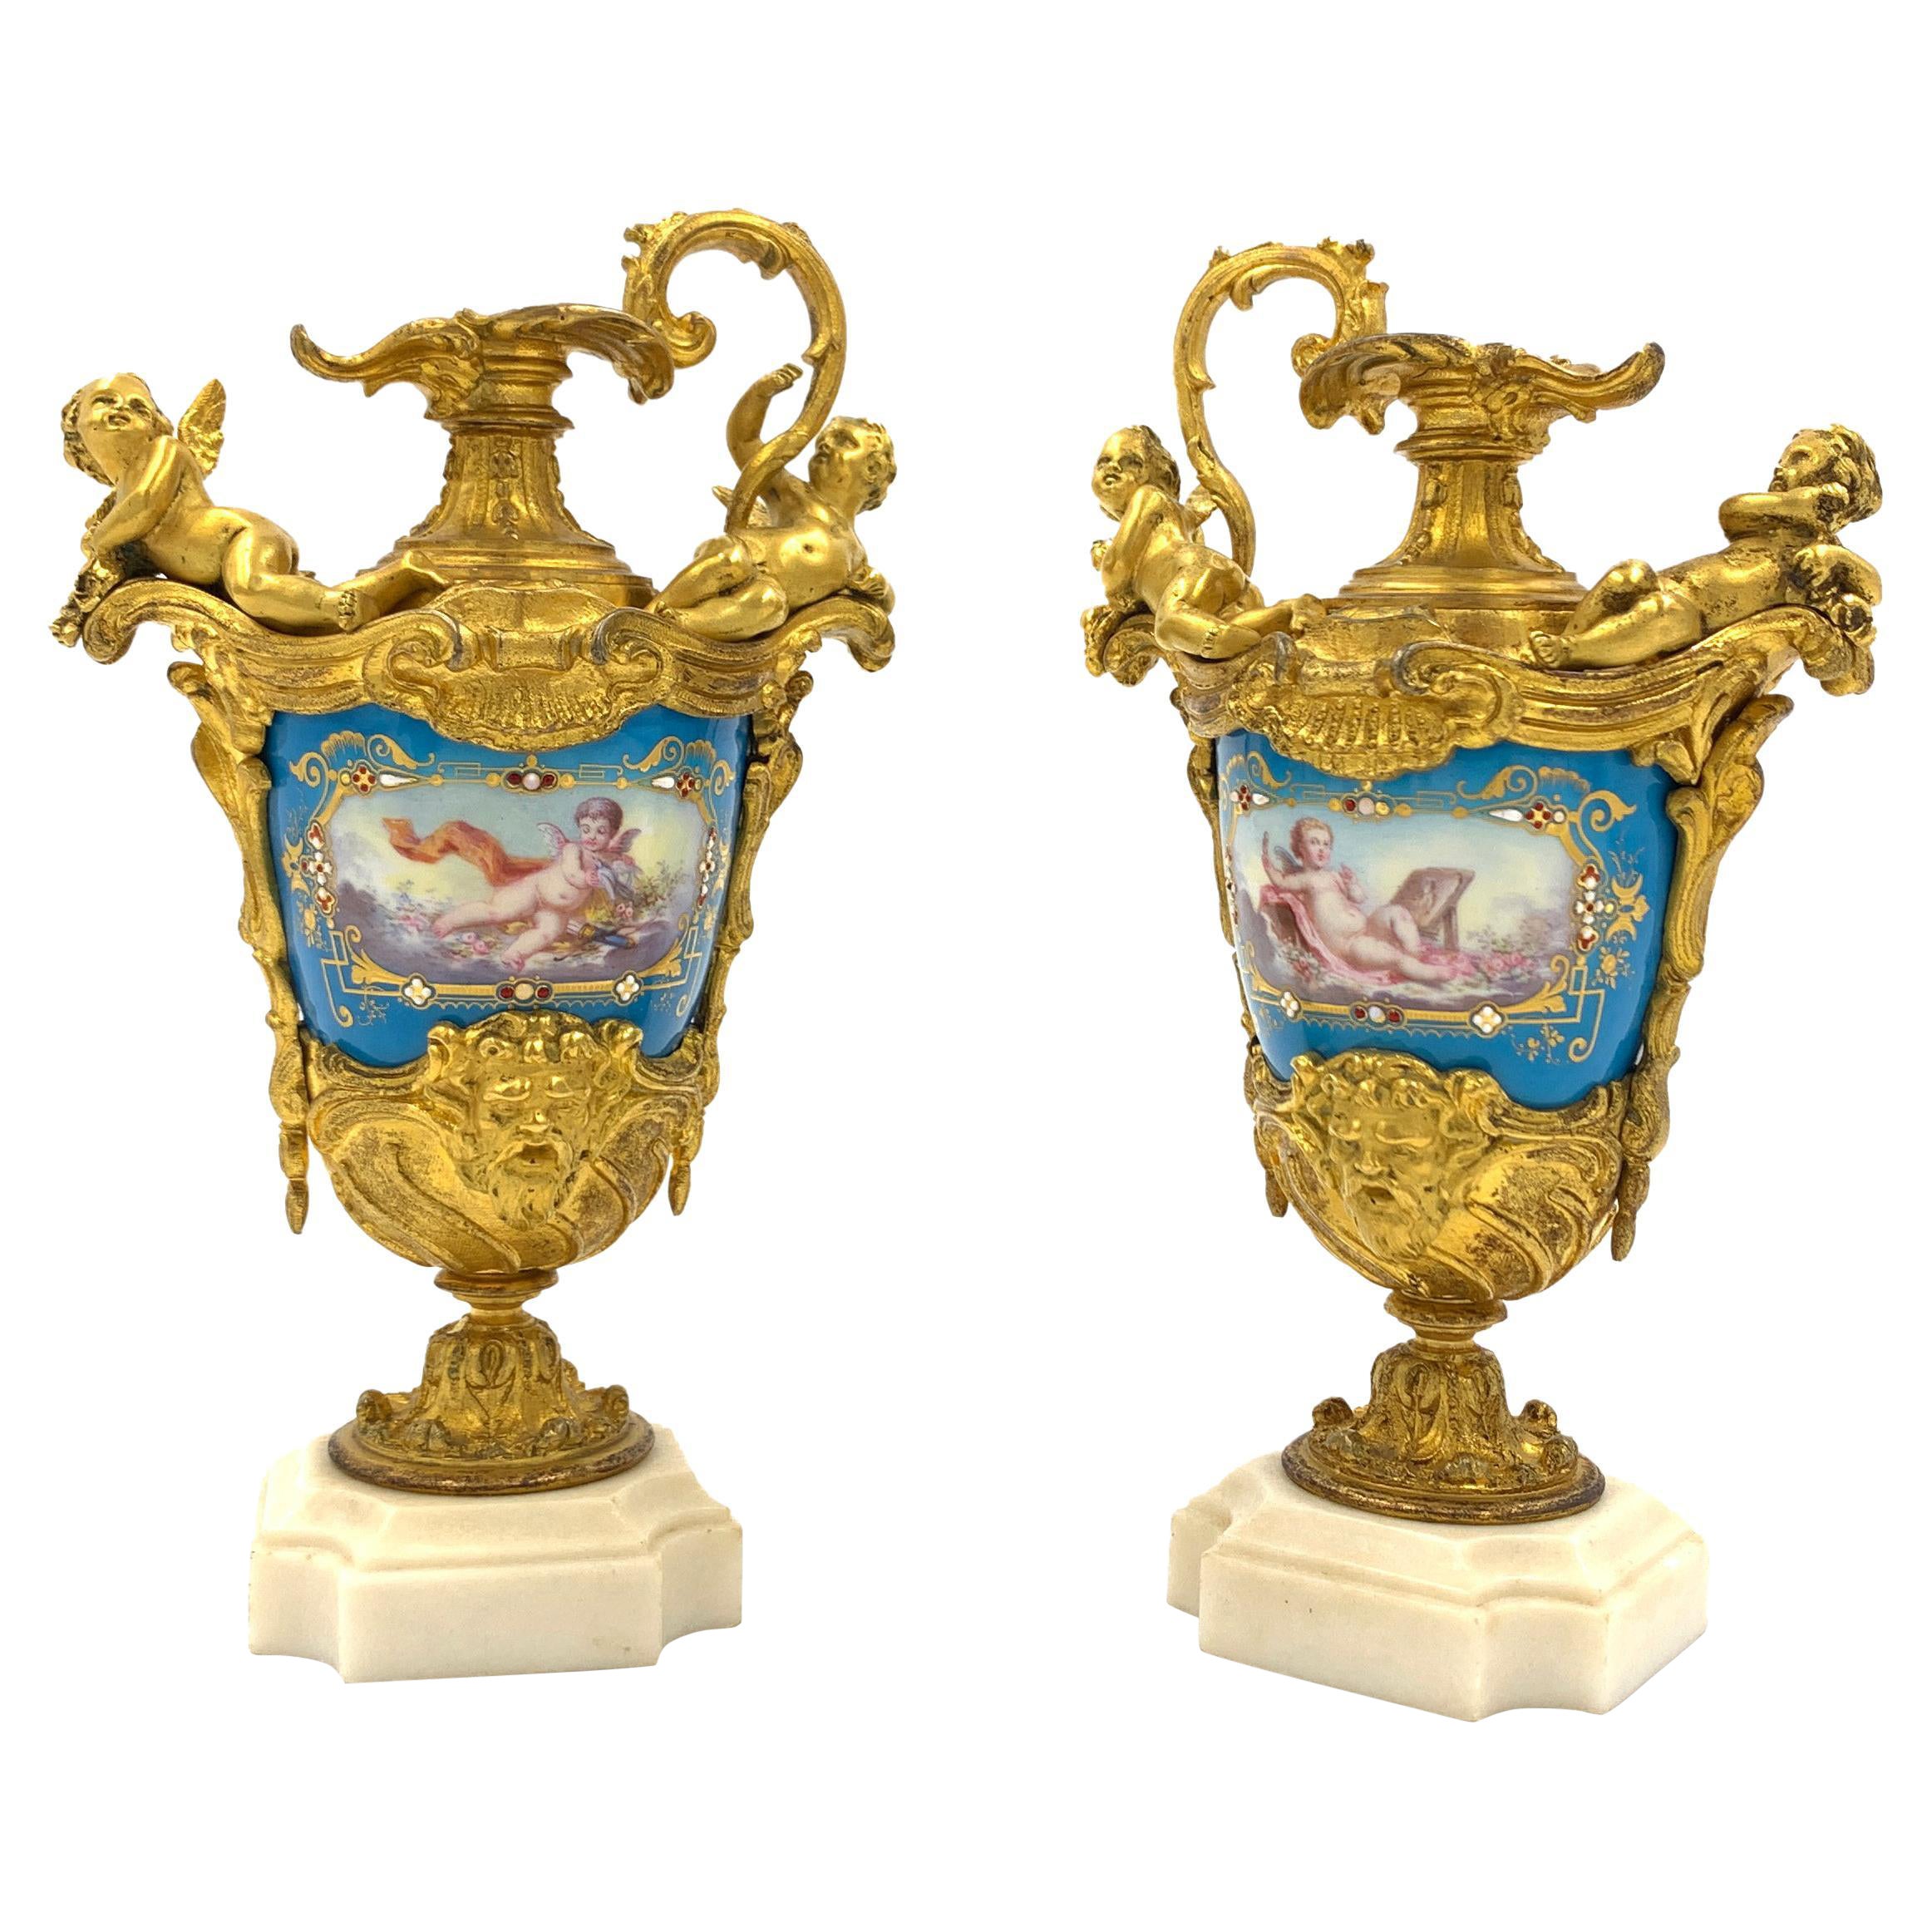 Pair of Sevres Style Jewelled Porcelain and Gilt Metal Ewer Vases For Sale